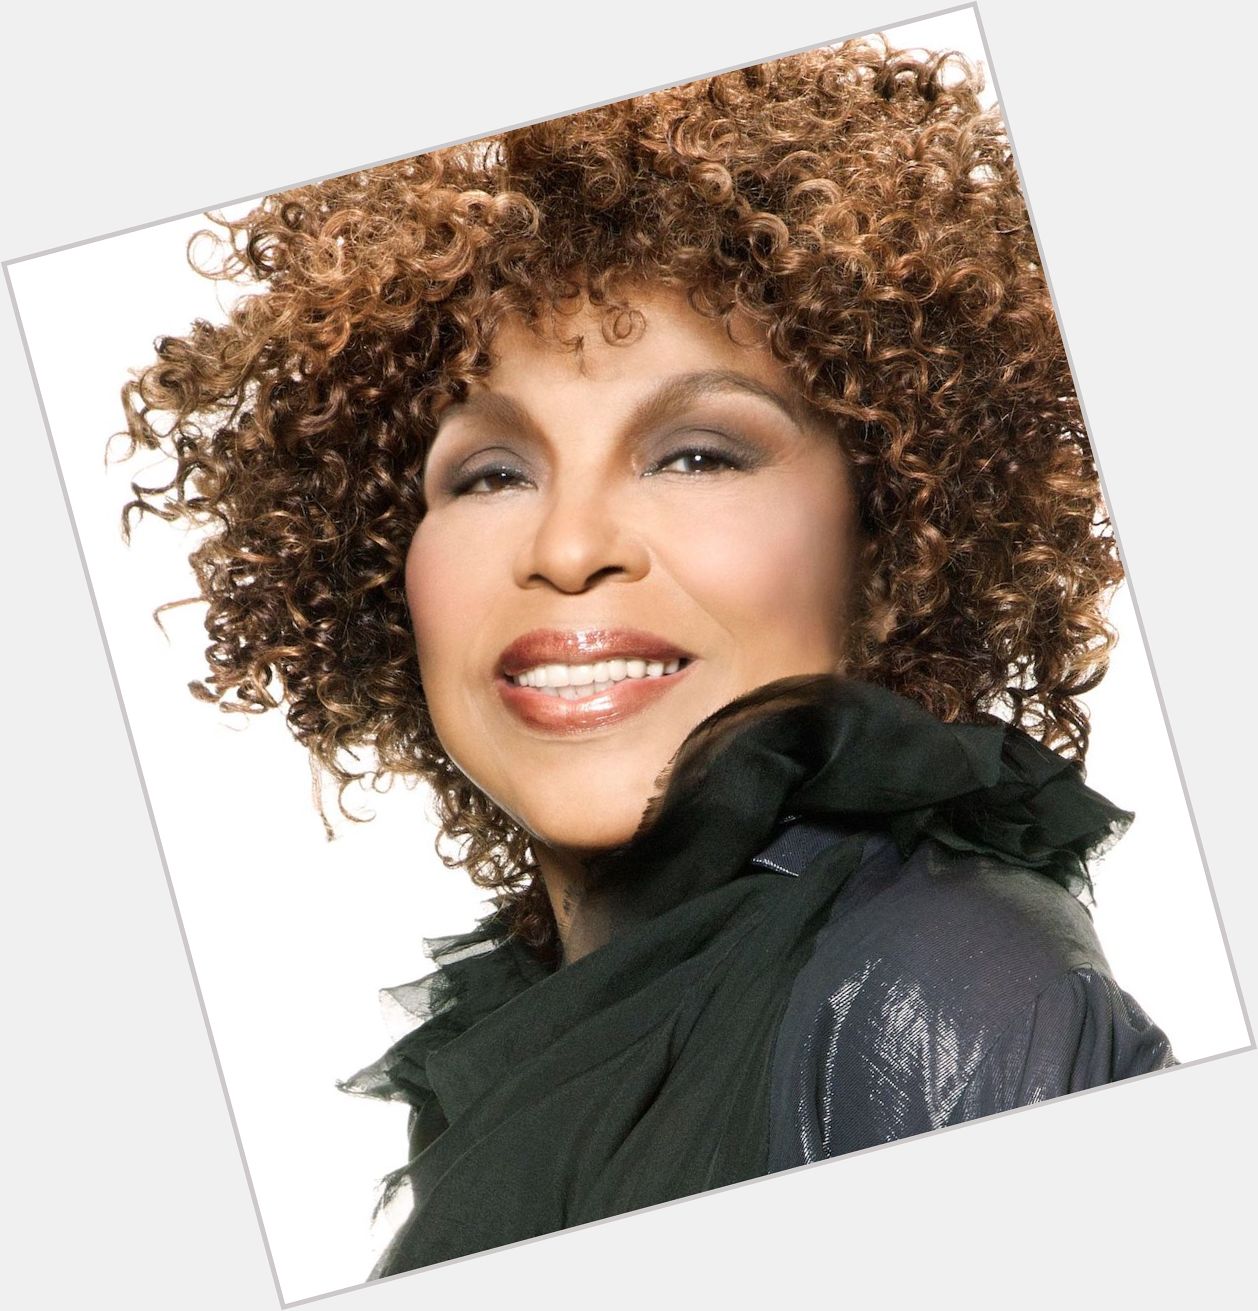 Happy 78th Birthday Roberta Flack (If I Ever Saw Your Face) 